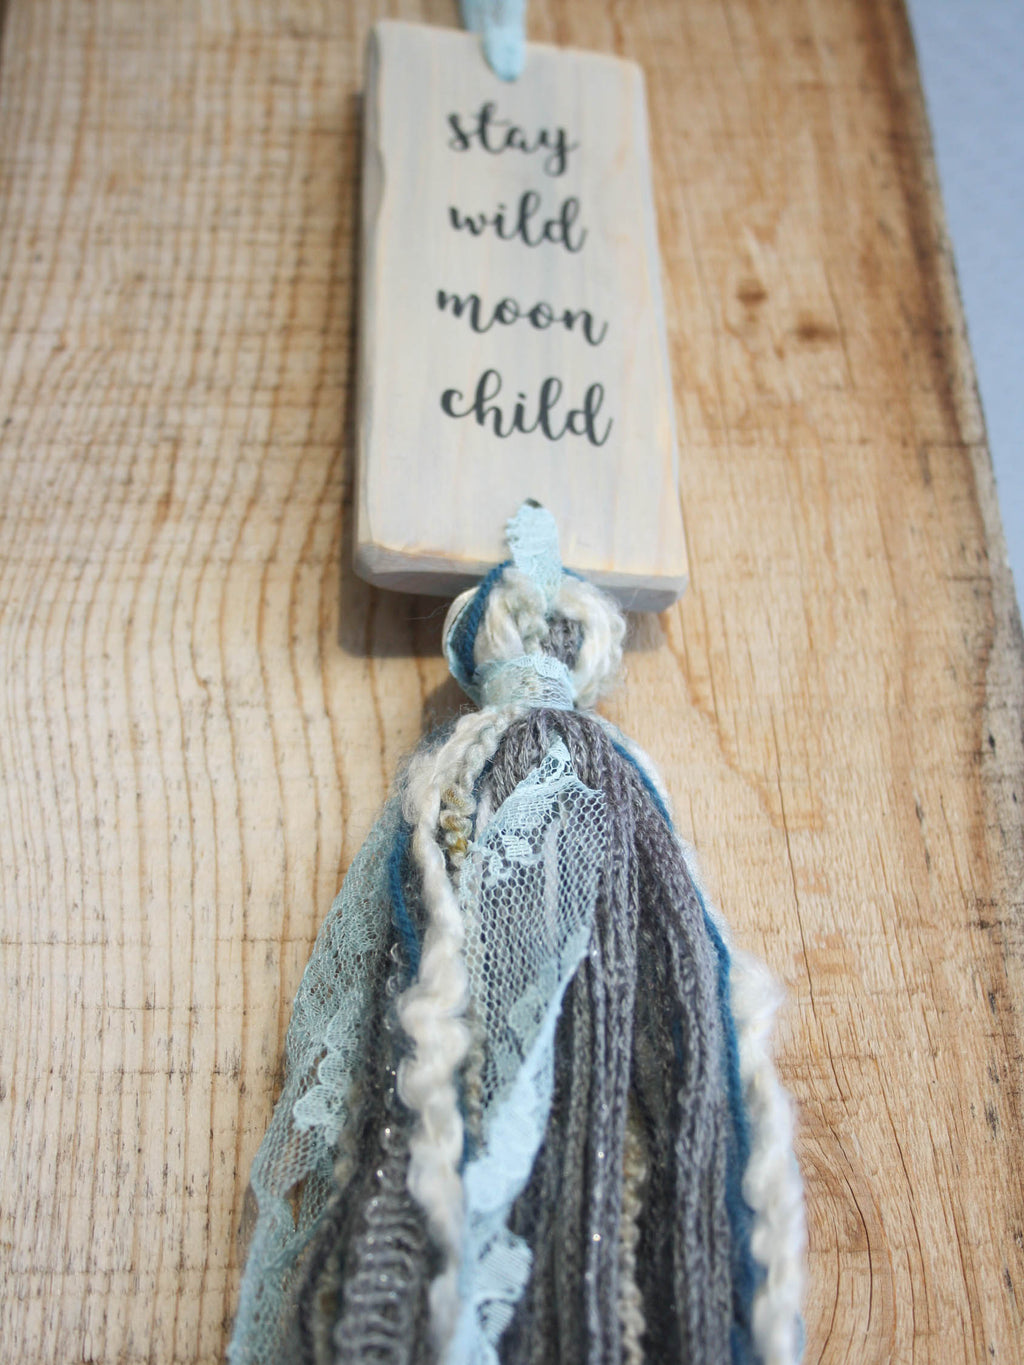 Tassel Wall Hanging - Grey Rectangle - Stay wild moon child